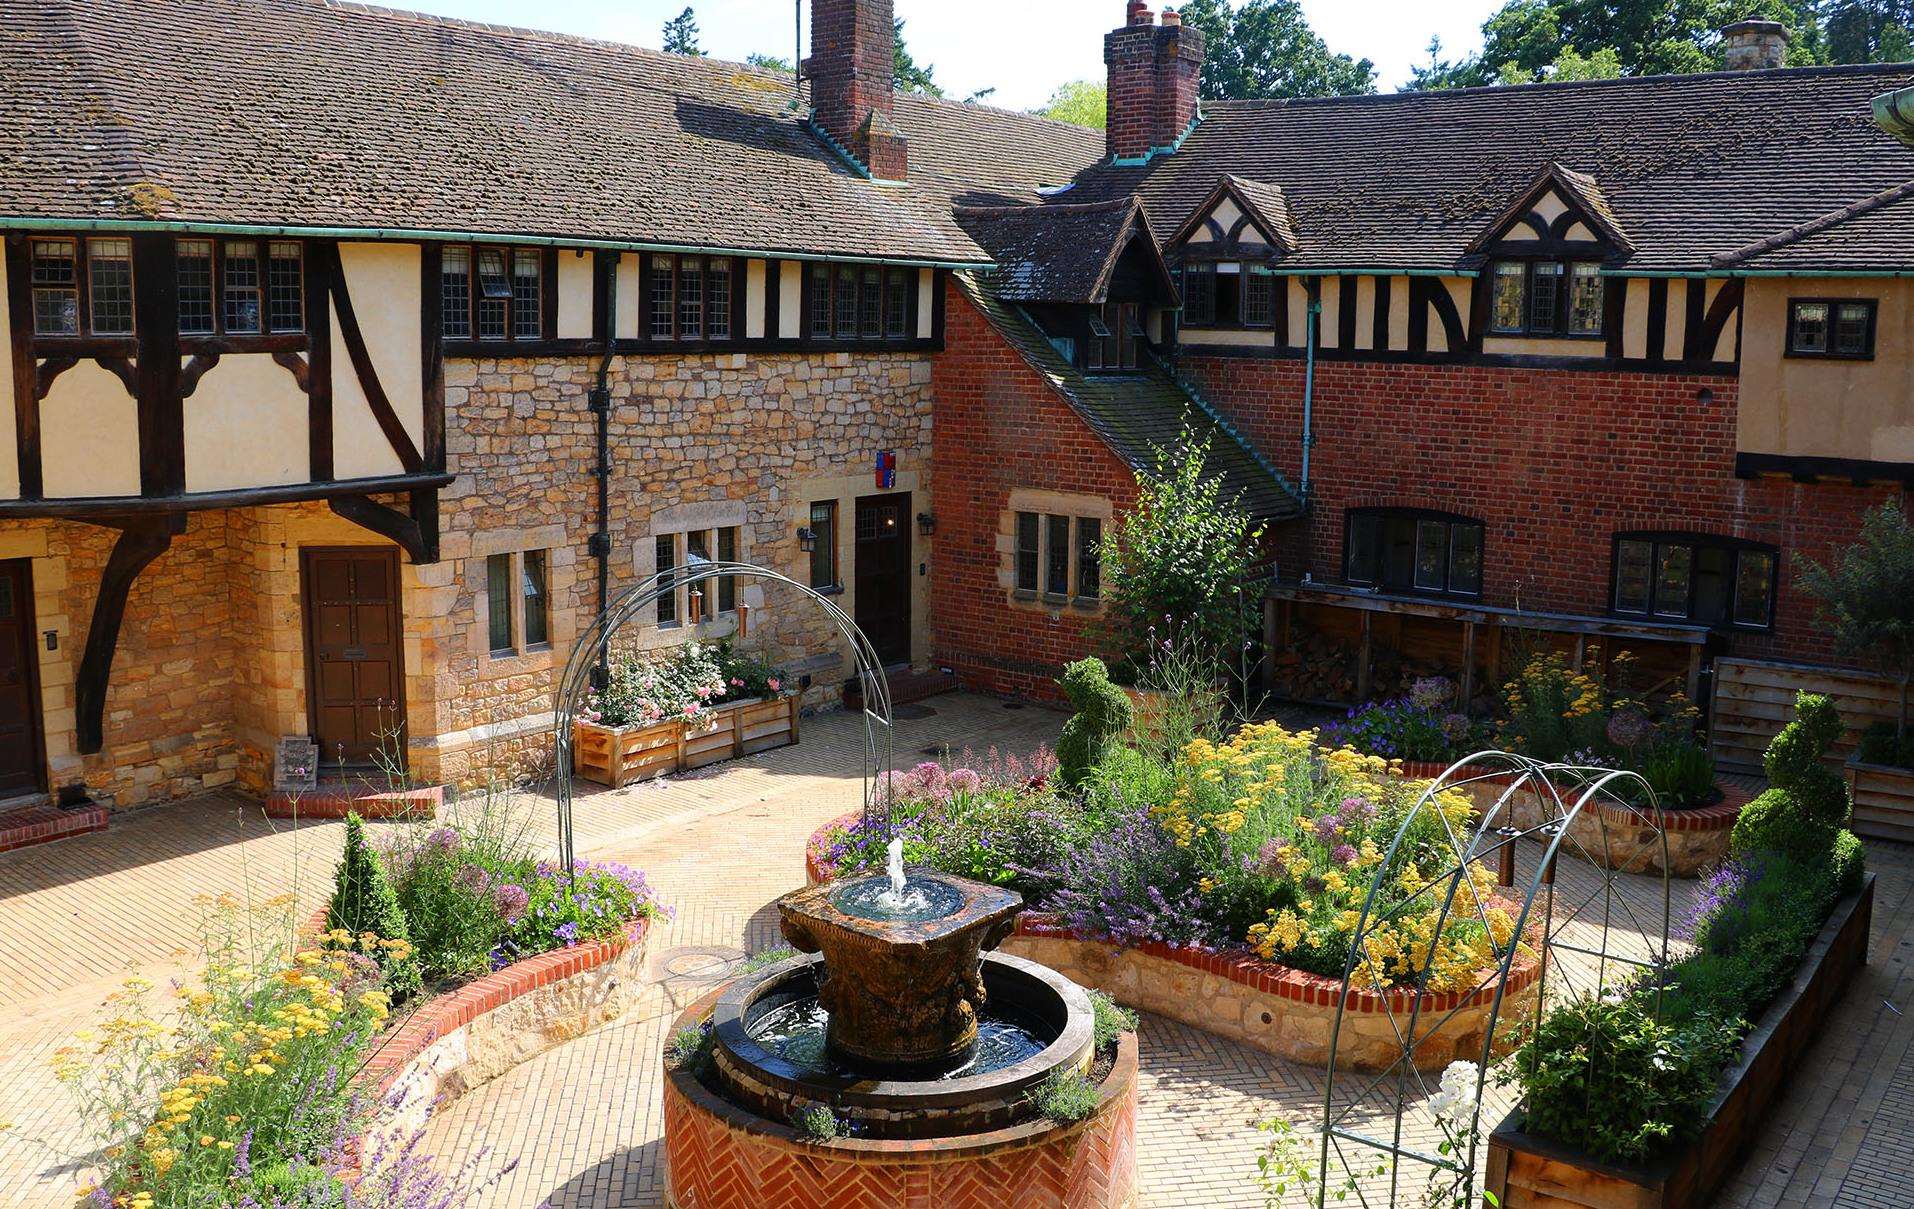 Hever Castle B&B rooms overlook this immaculate courtyard Picture: Hever Castle & Gardens